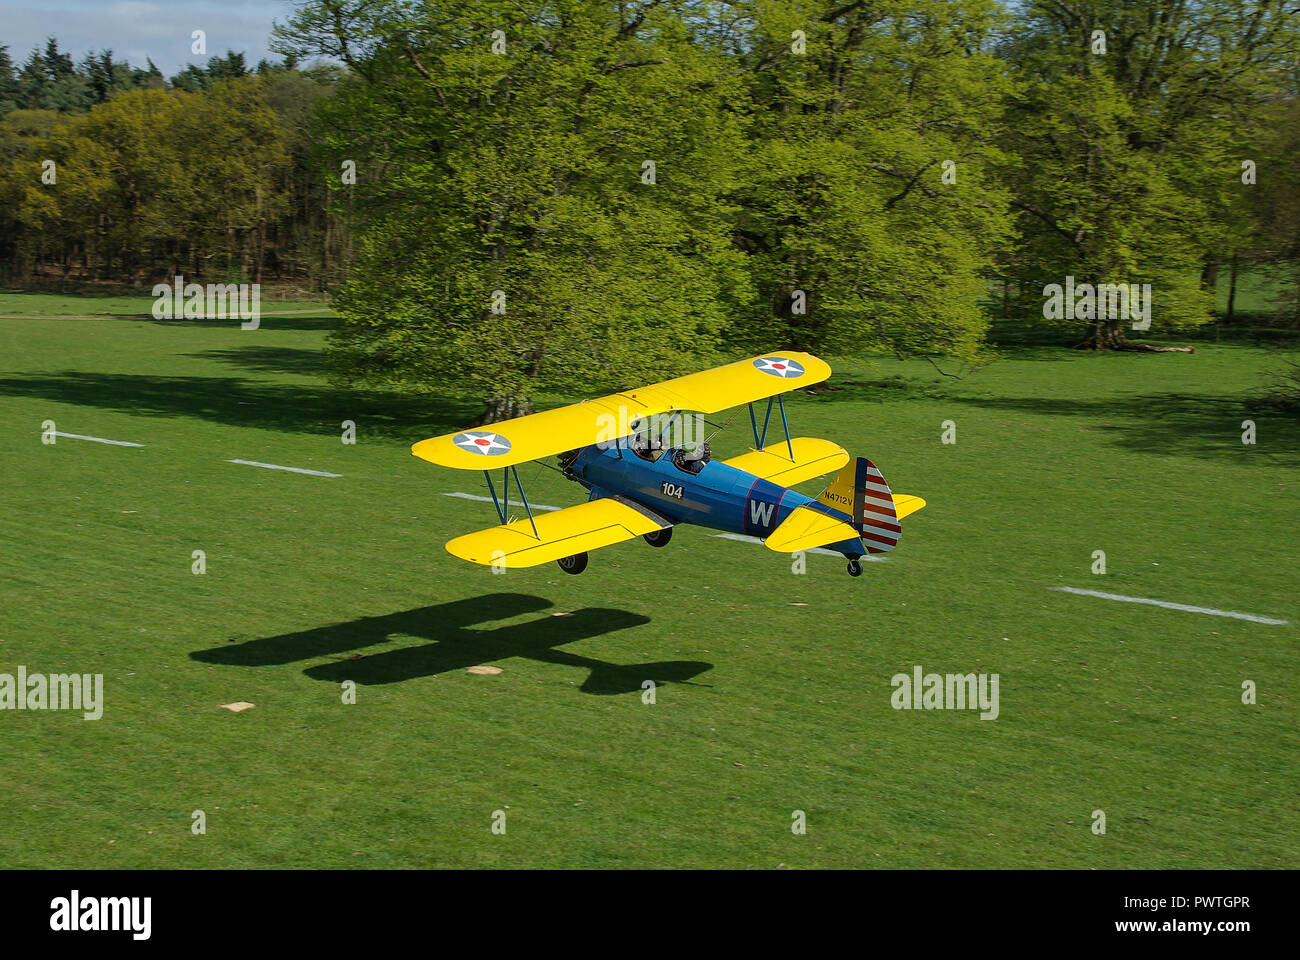 Boeing Kaydet biplane N4712V, trainer plane taking off from Henham Park countryside grass strip. Tree lined Suffolk grass runway on sunny day Stock Photo